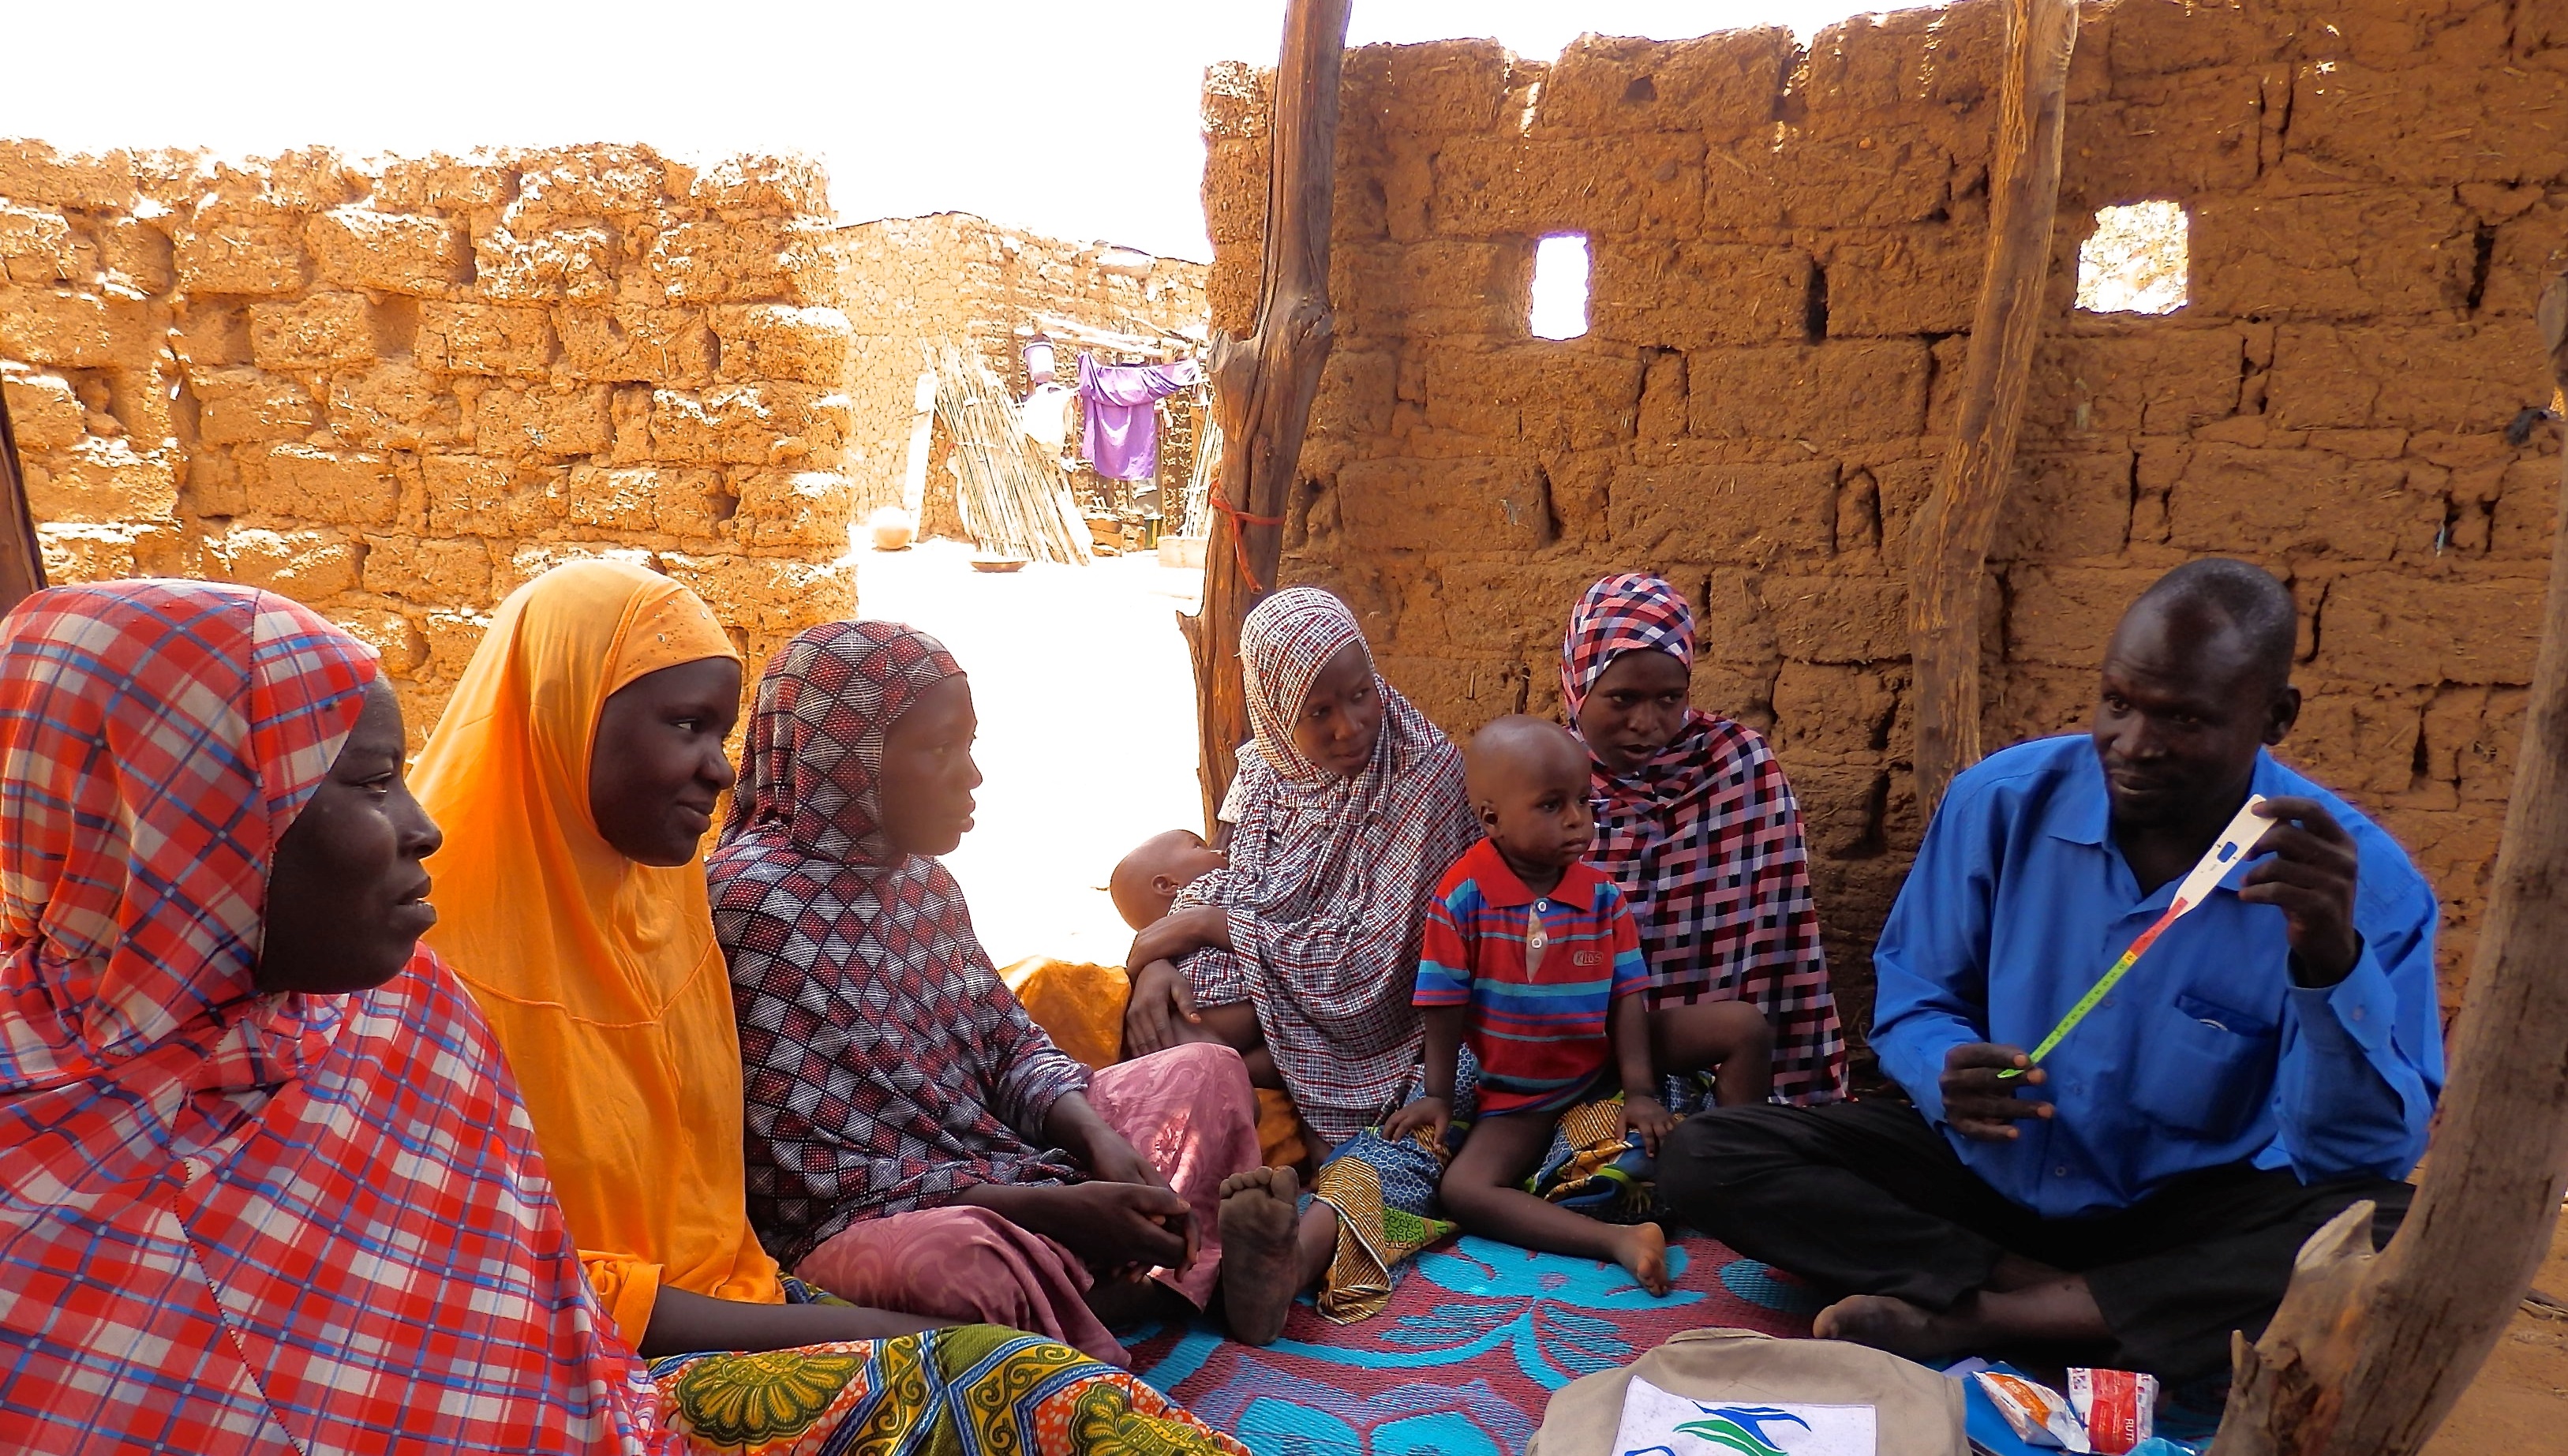 Interventions in Mali to ensure health care and combat child malnutrition